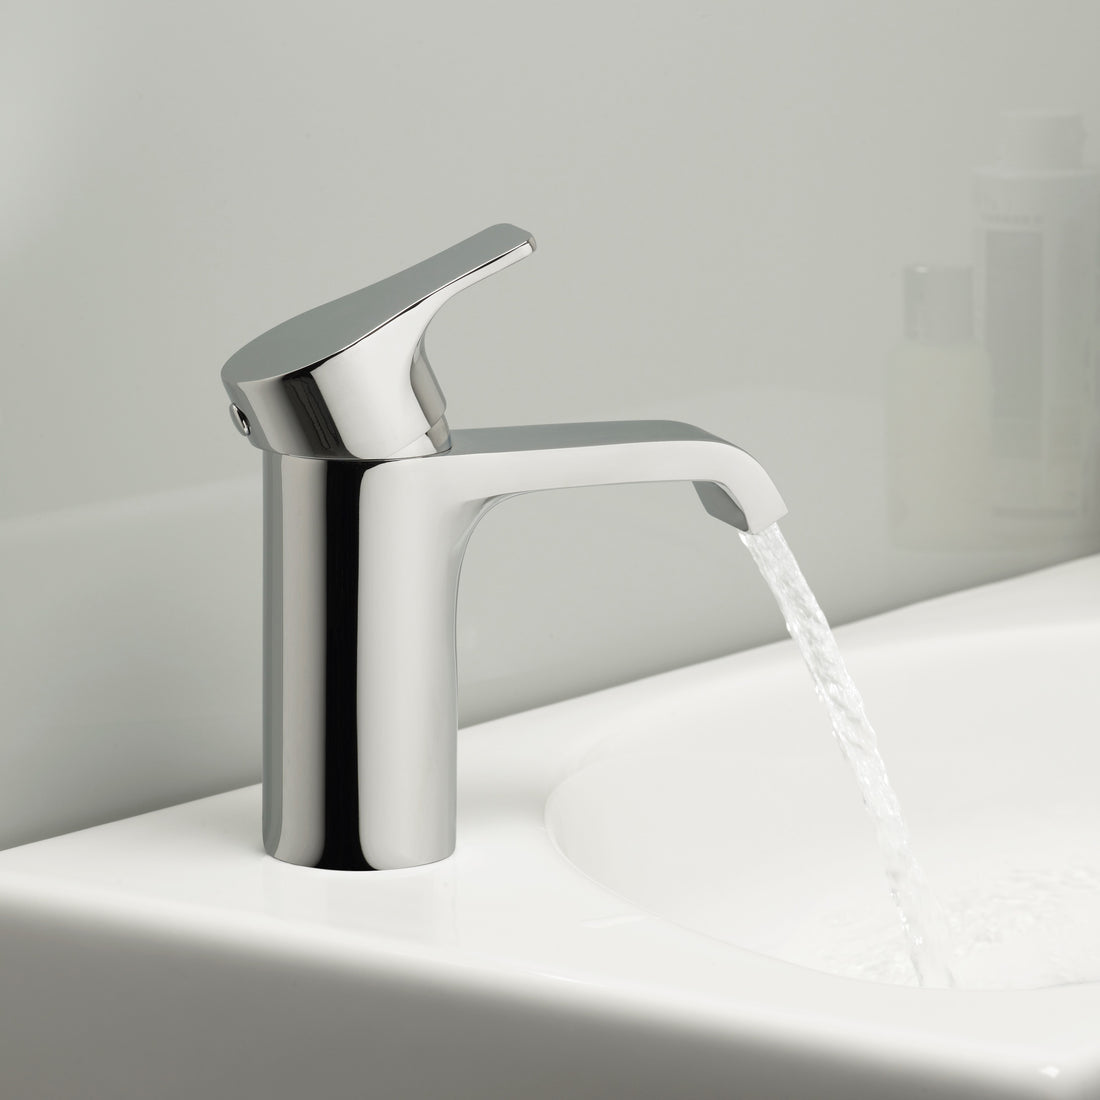 Tavistock Blaze Basin Mixer With Click Waste - Chrome  in front of white wall TBL11